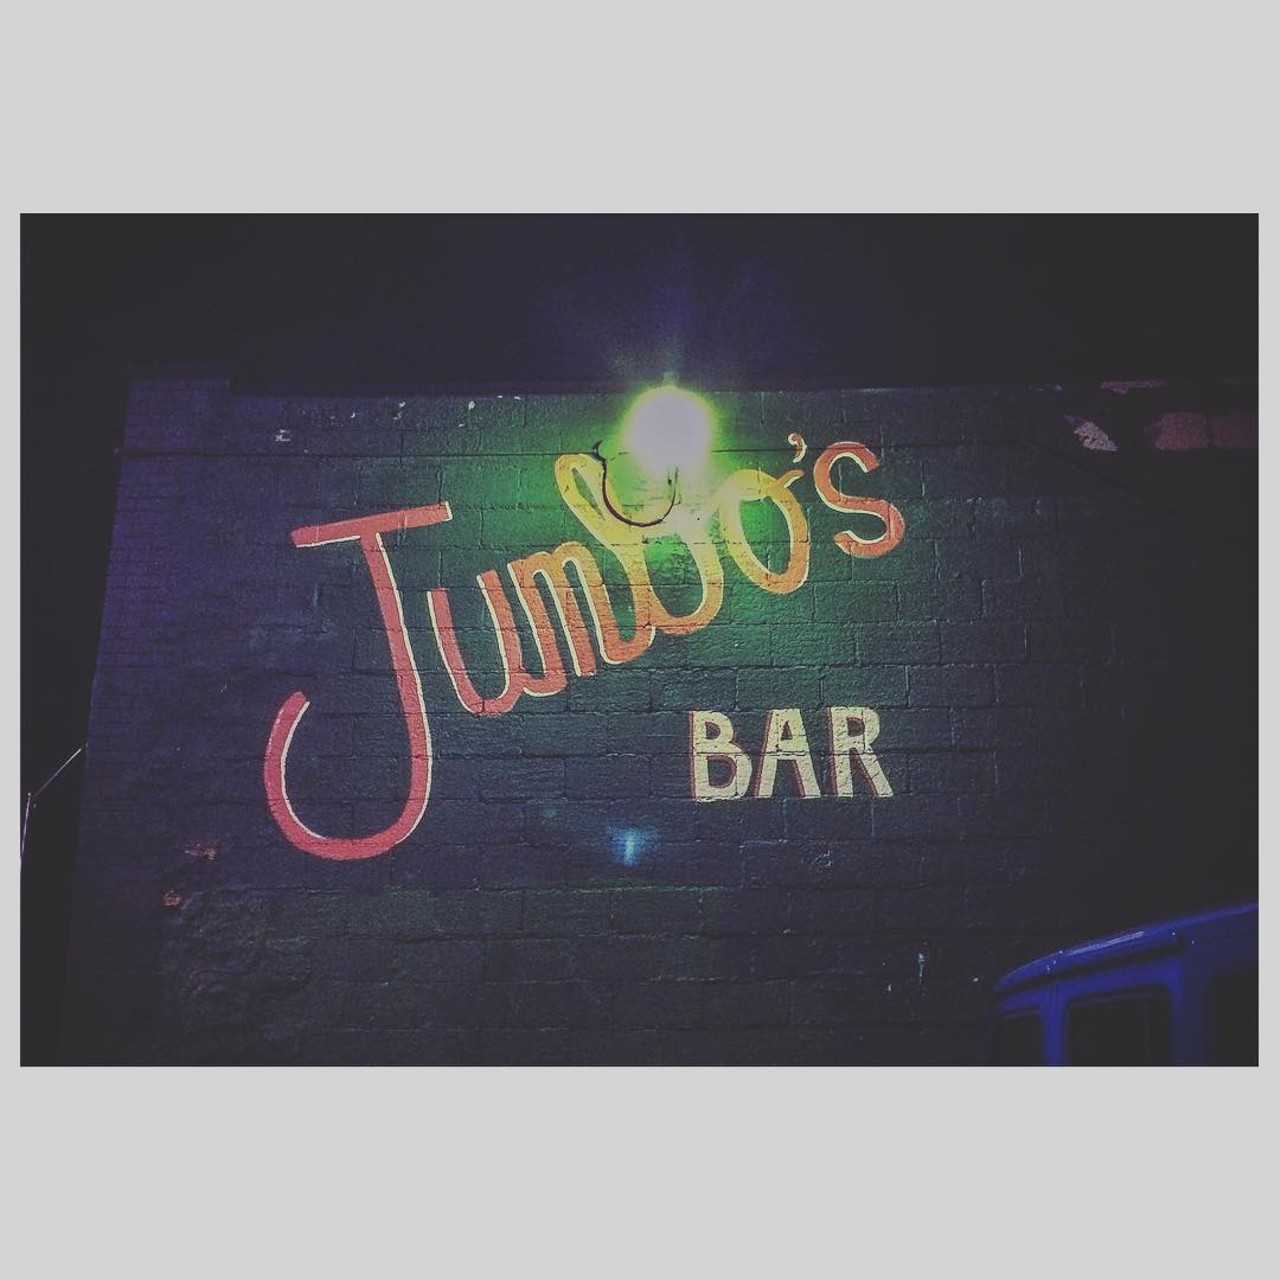 Jumbo&#146;s Bar
3736 3rd Ave, Detroit
(313)-831-8949
The ultimate neighborhood bar, Jumbo&#146;s is a place where you can sit at the bar for hours on end and not be bothered by anyone.
Photo via Instagram